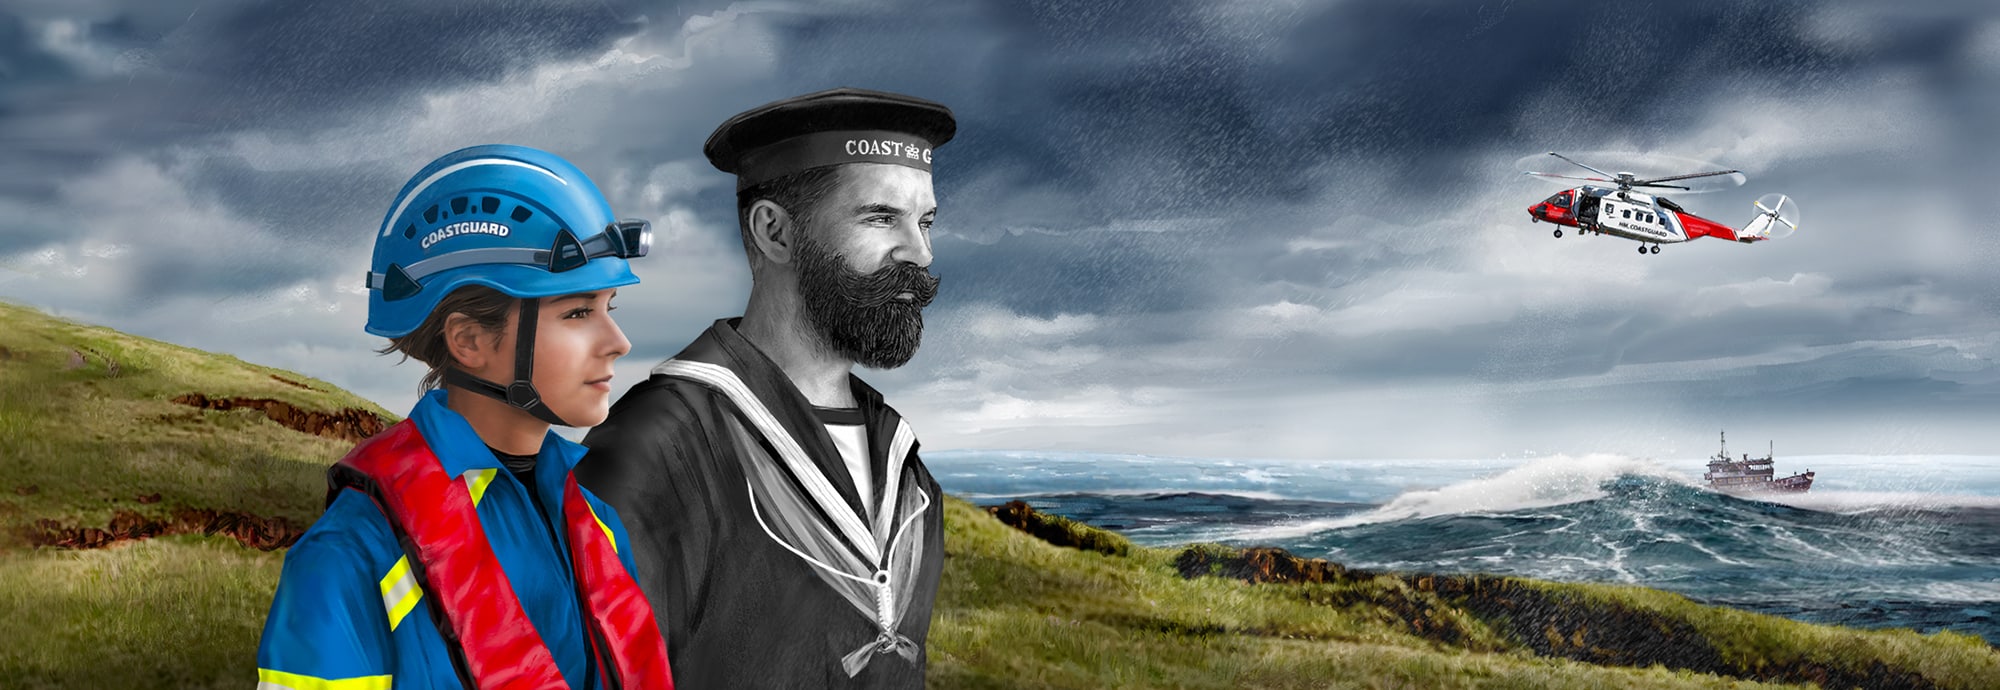 An illustration of two people against a hill and a stormy sky. The woman closest is drawn in colour wearing a present-day Coastguard uniform. The man next to her is drawn in black and white and wears an older Coastguard uniform. In the background, a helicopter assists a ship in distress.